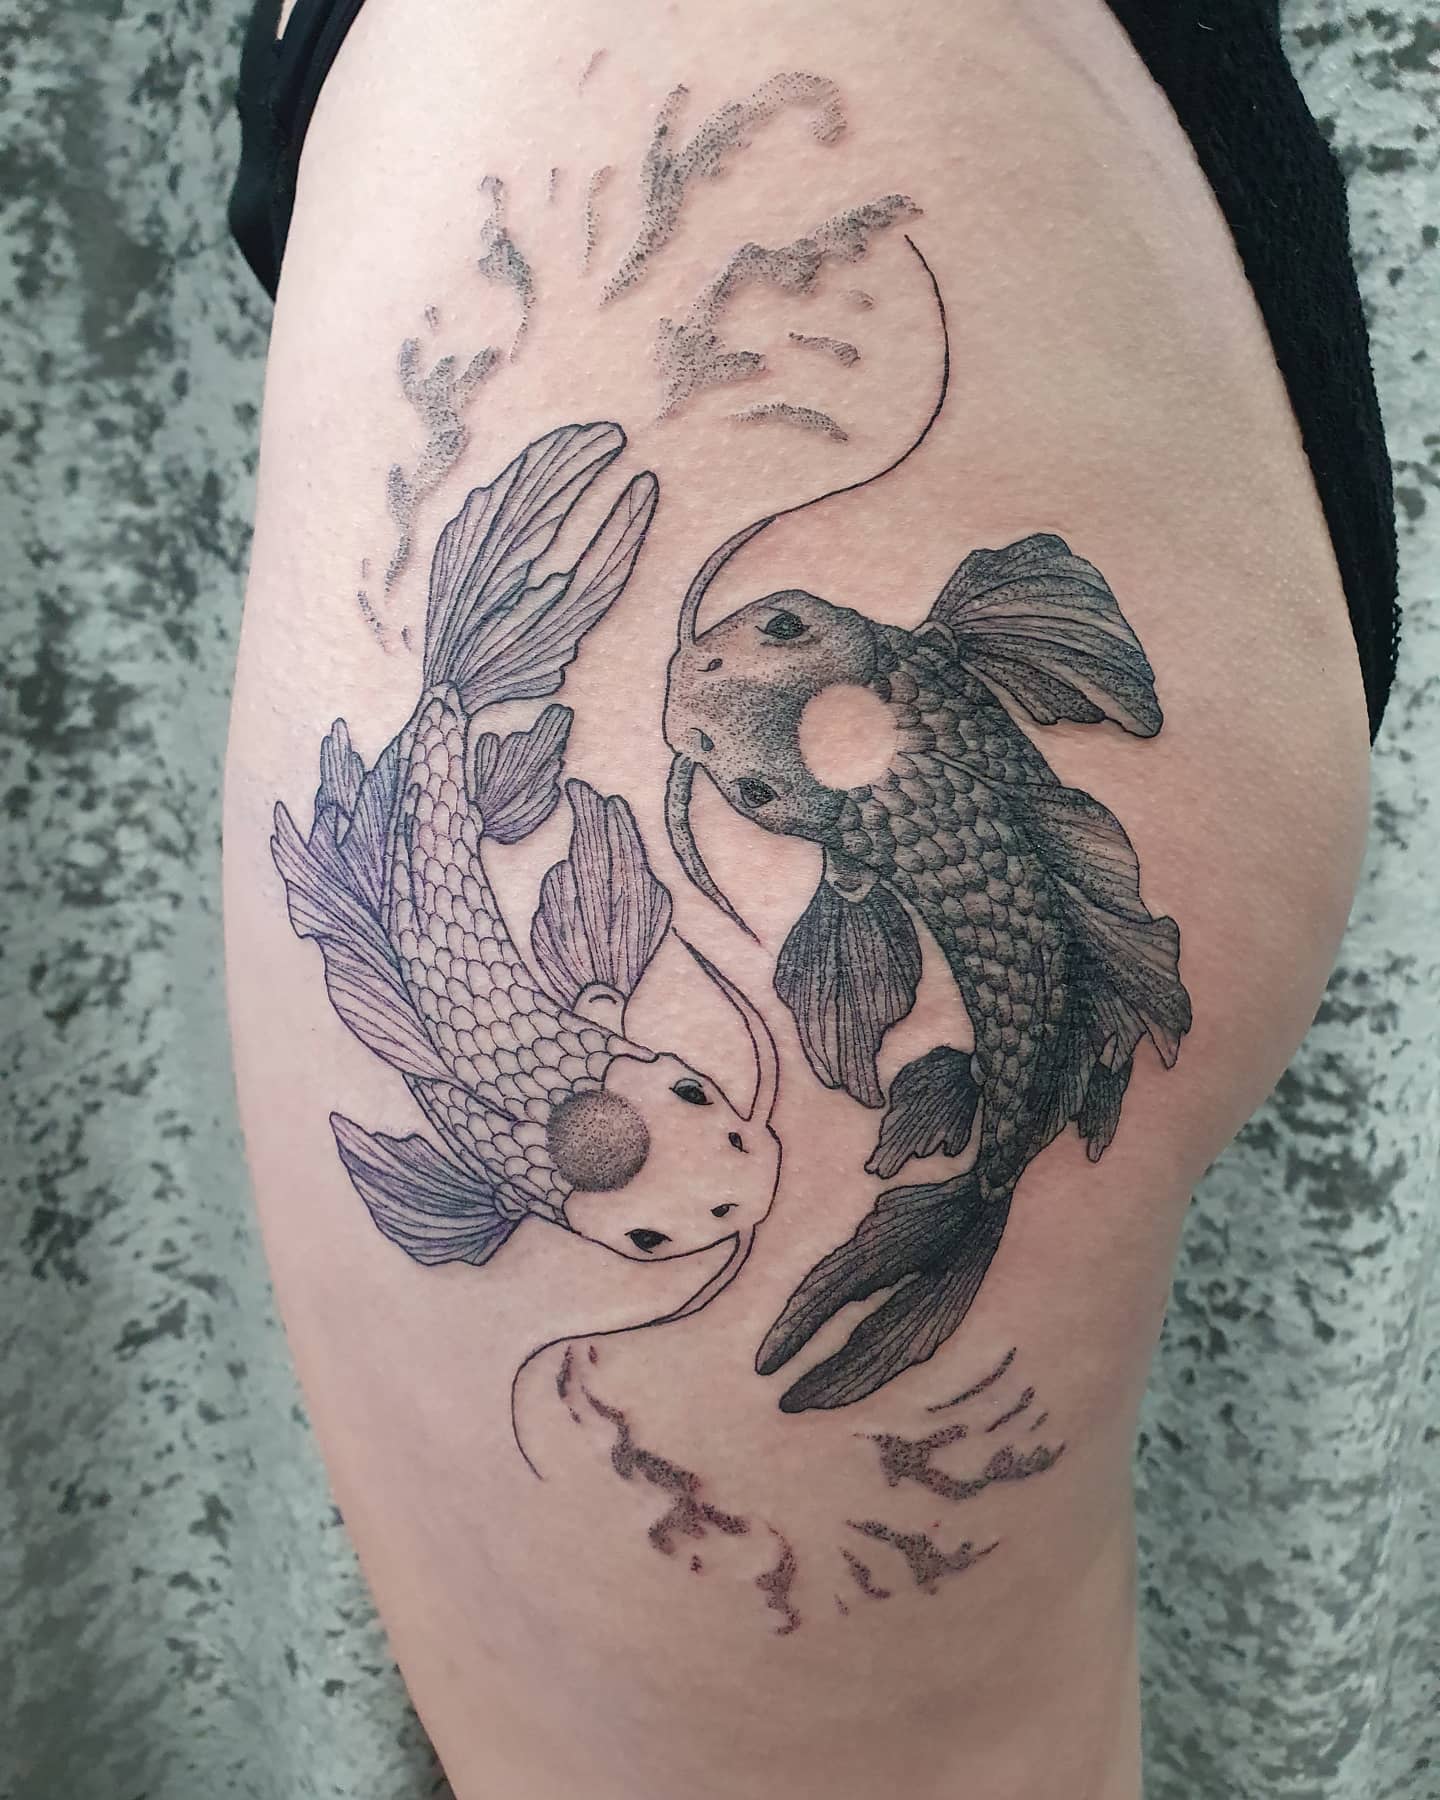 Found this from a local tattoo shops Insta thought Reddit would enjoy   rATLA